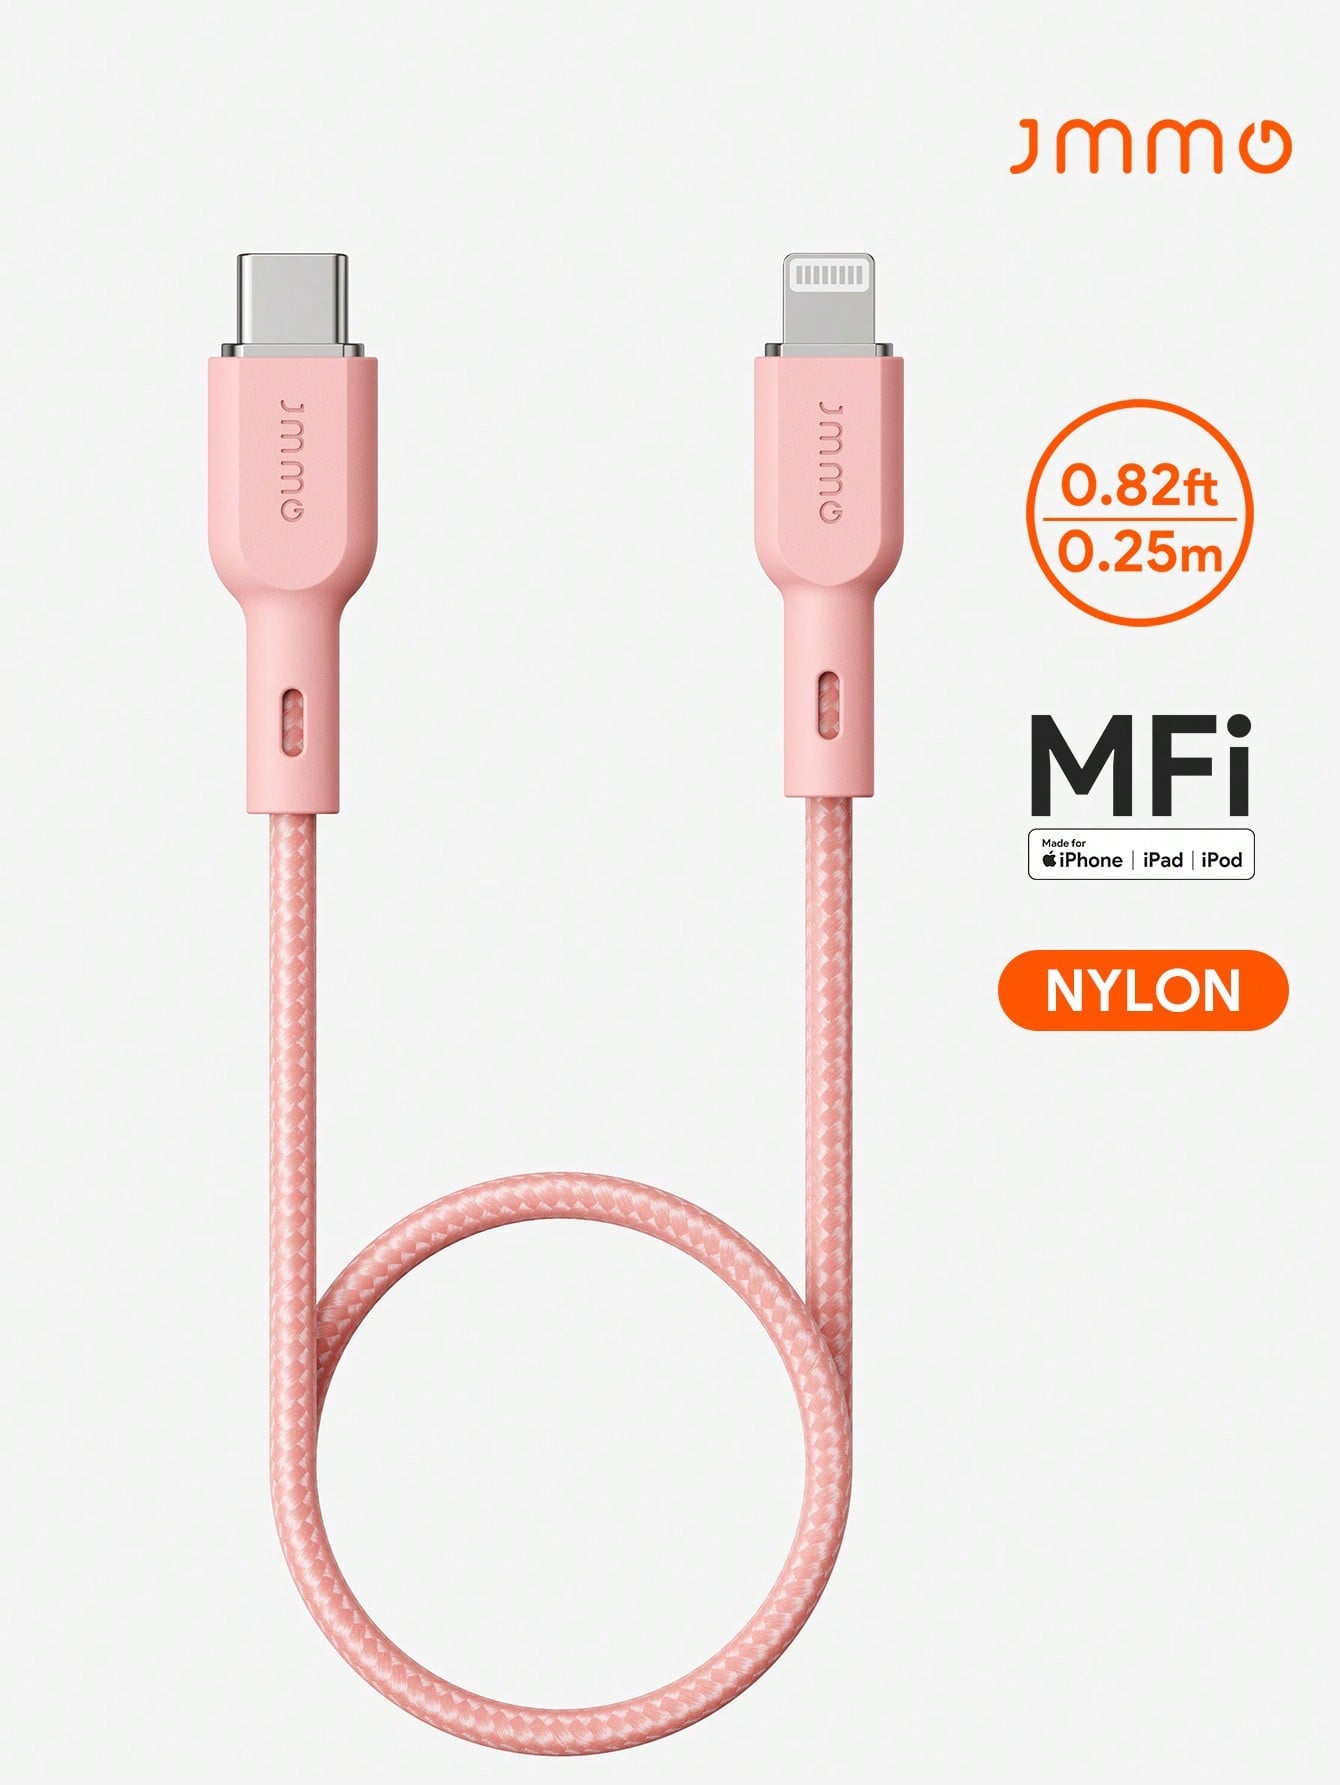 JMMO Cable IPhone,Nylon USB-C To Lightning Cable,Nylon Braided Cord Compatible With IPhone 0.82FT/0.25M 18W [Apple MFi Certified]